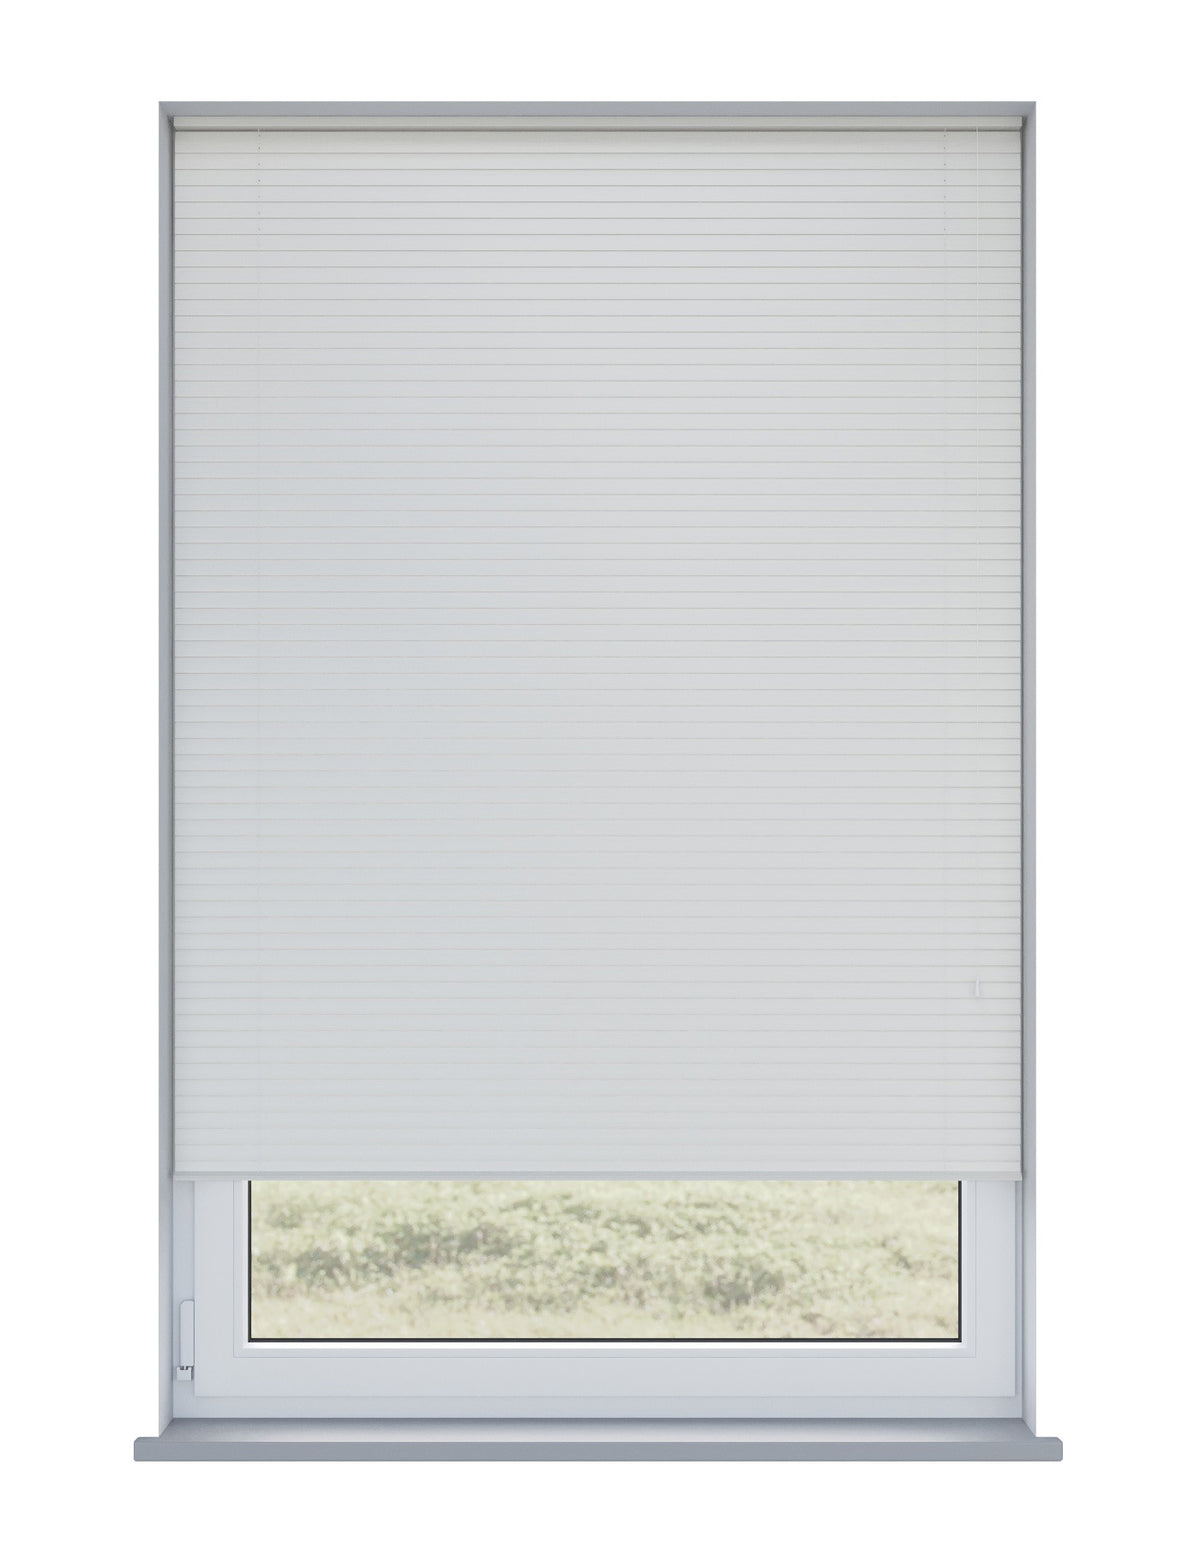 Expressions Cirrus Wooden Blind